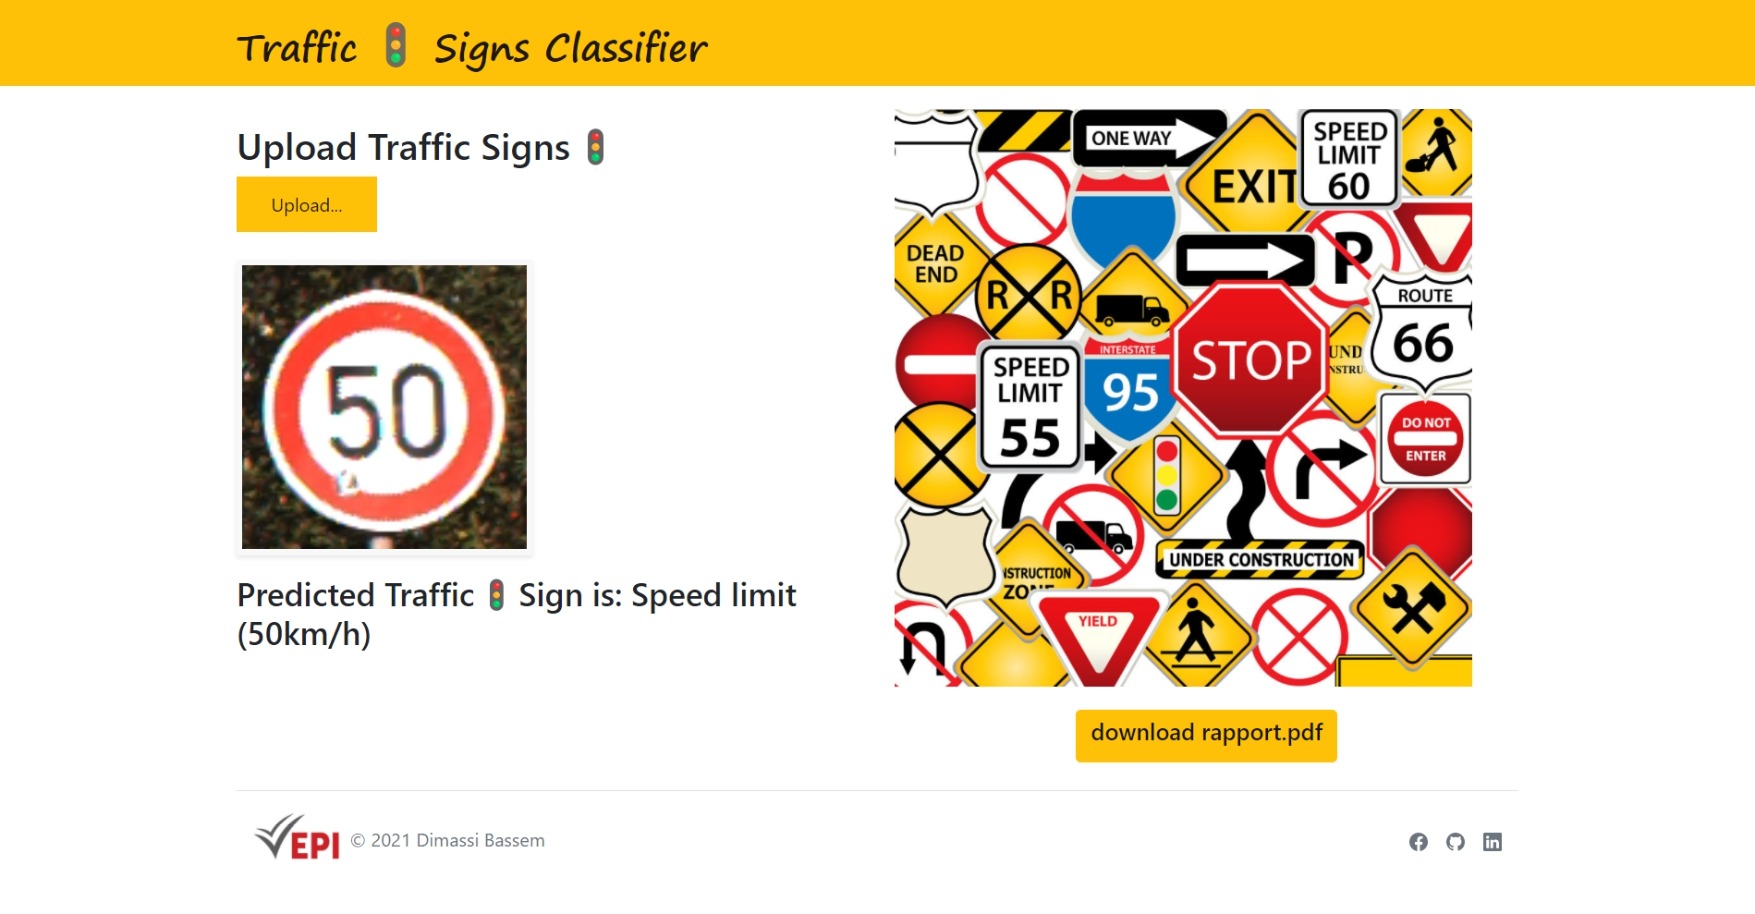 Traffic sign recognition